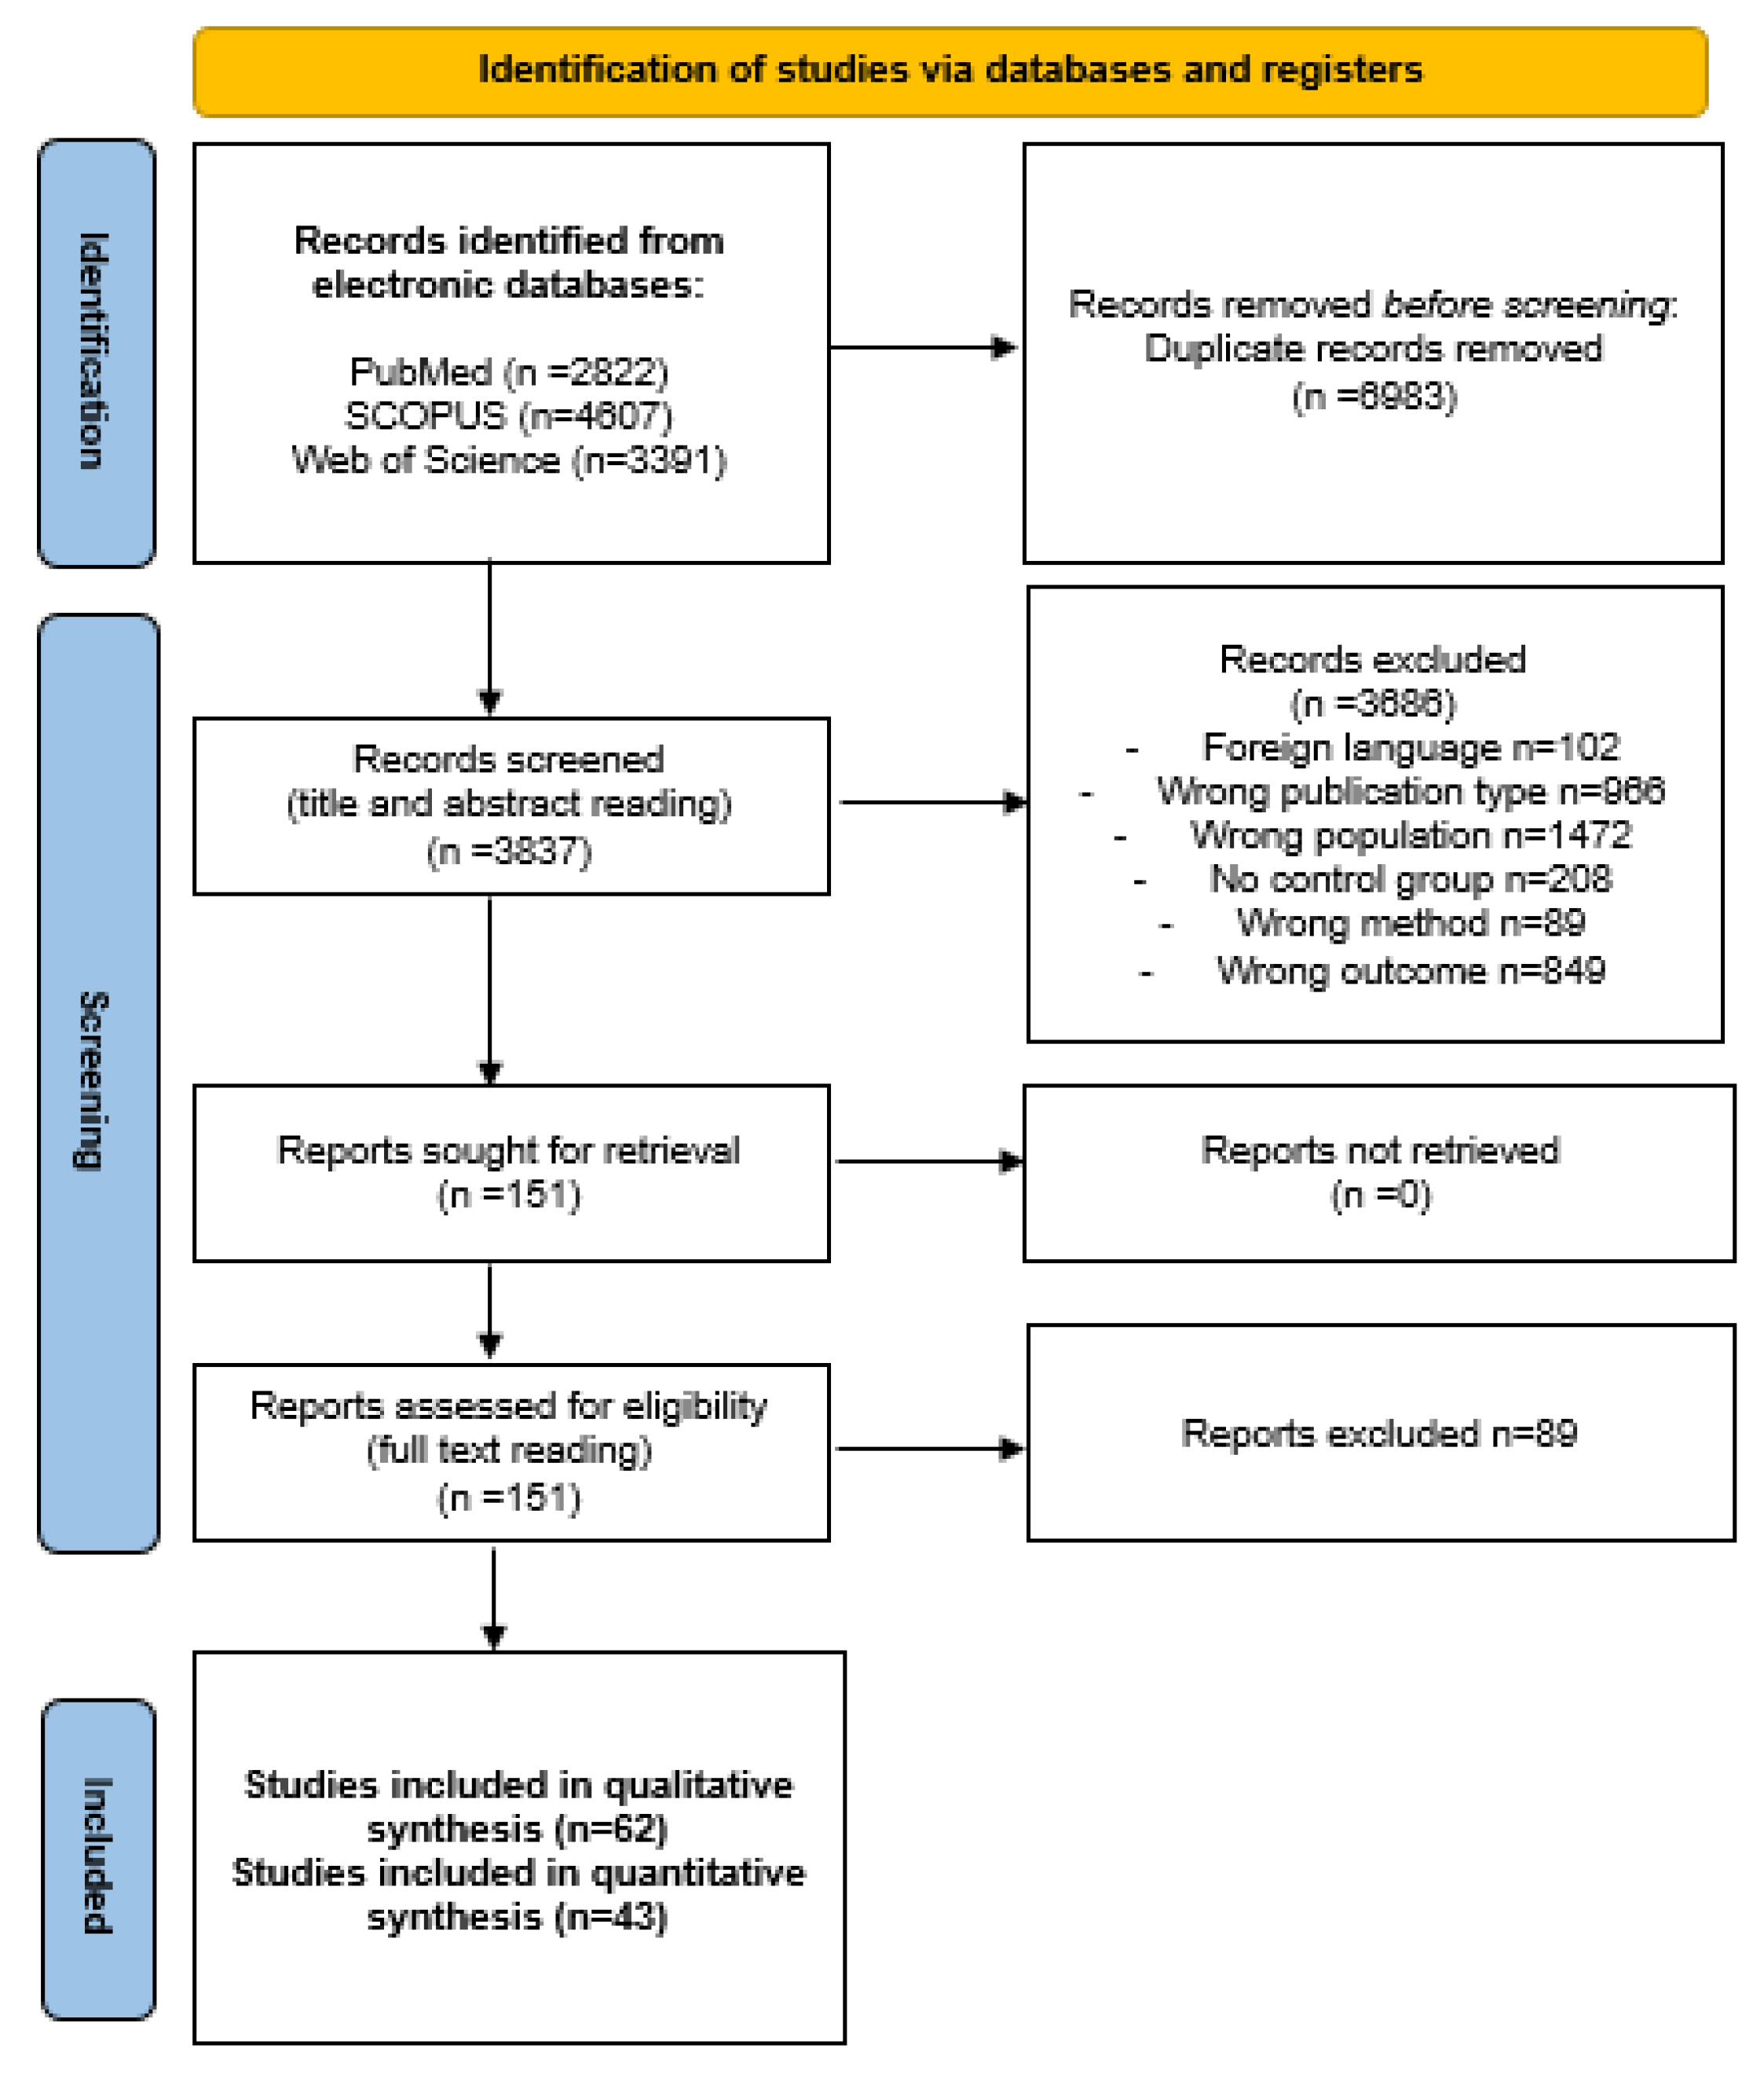 Medicina | Free Full-Text | Doppler Indices of the Uterine, Umbilical and  Fetal Middle Cerebral Artery in Diabetic versus Non-Diabetic Pregnancy:  Systematic Review and Meta-Analysis